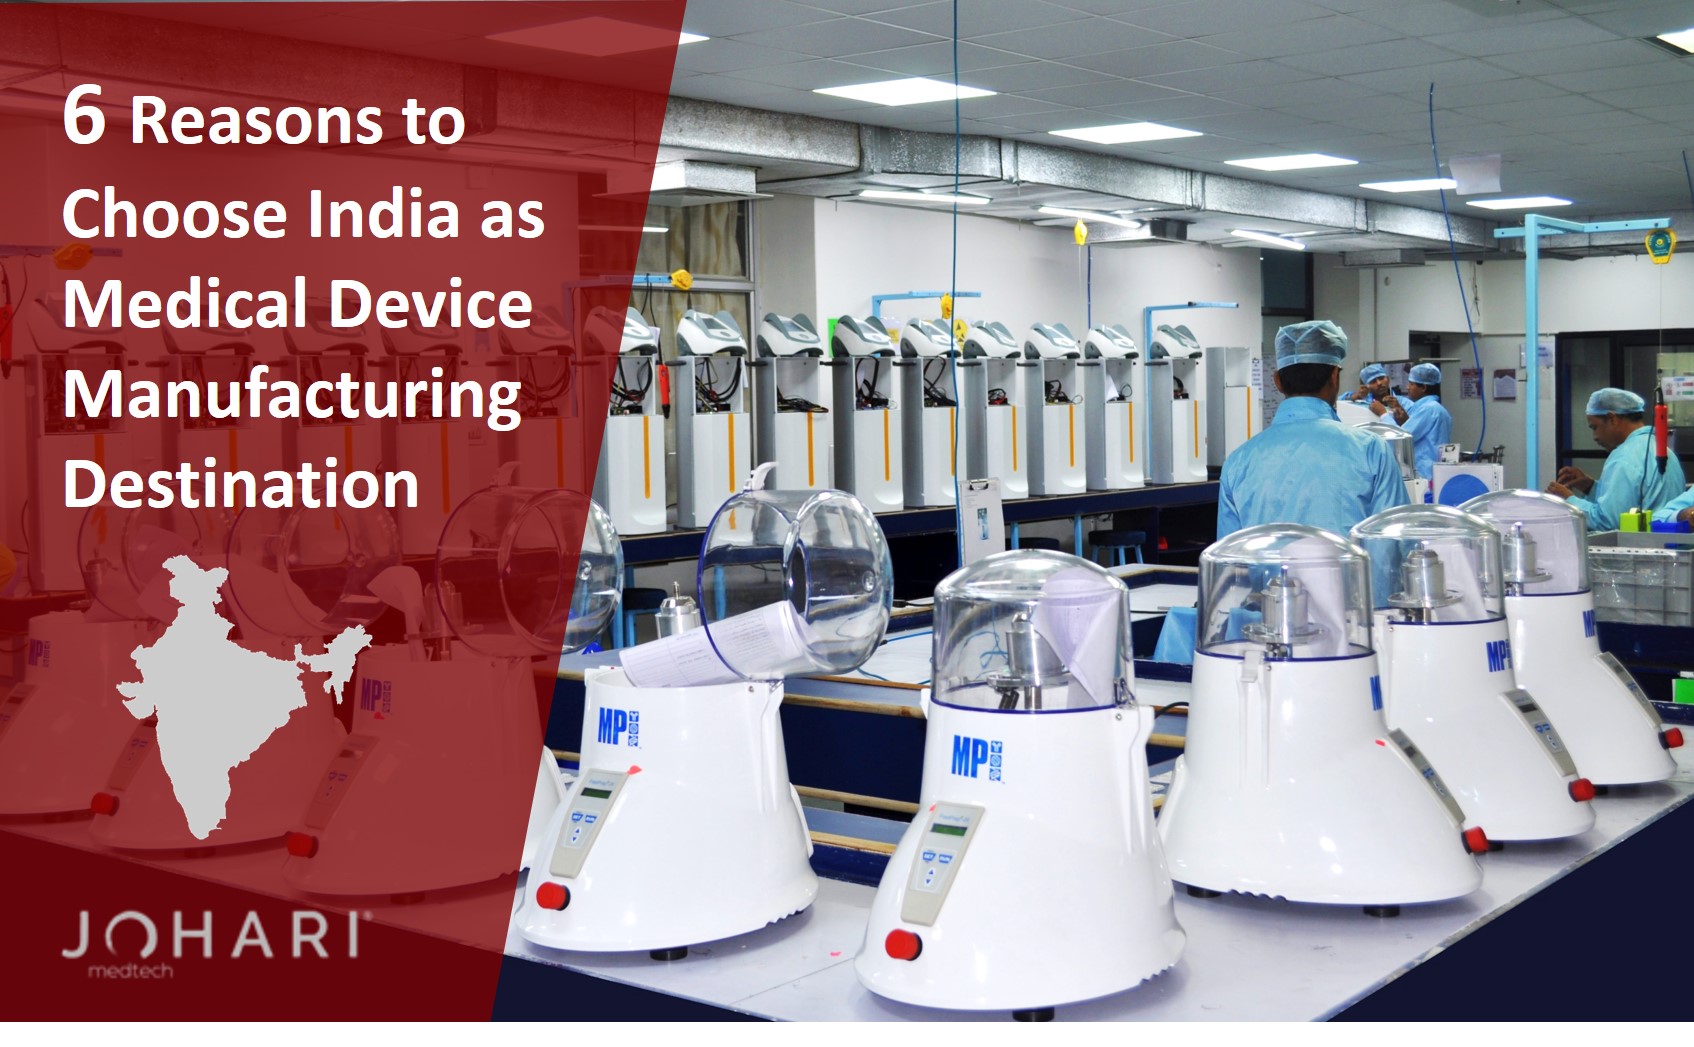 6 Reasons to Choose India as Medical Device Manufacturing